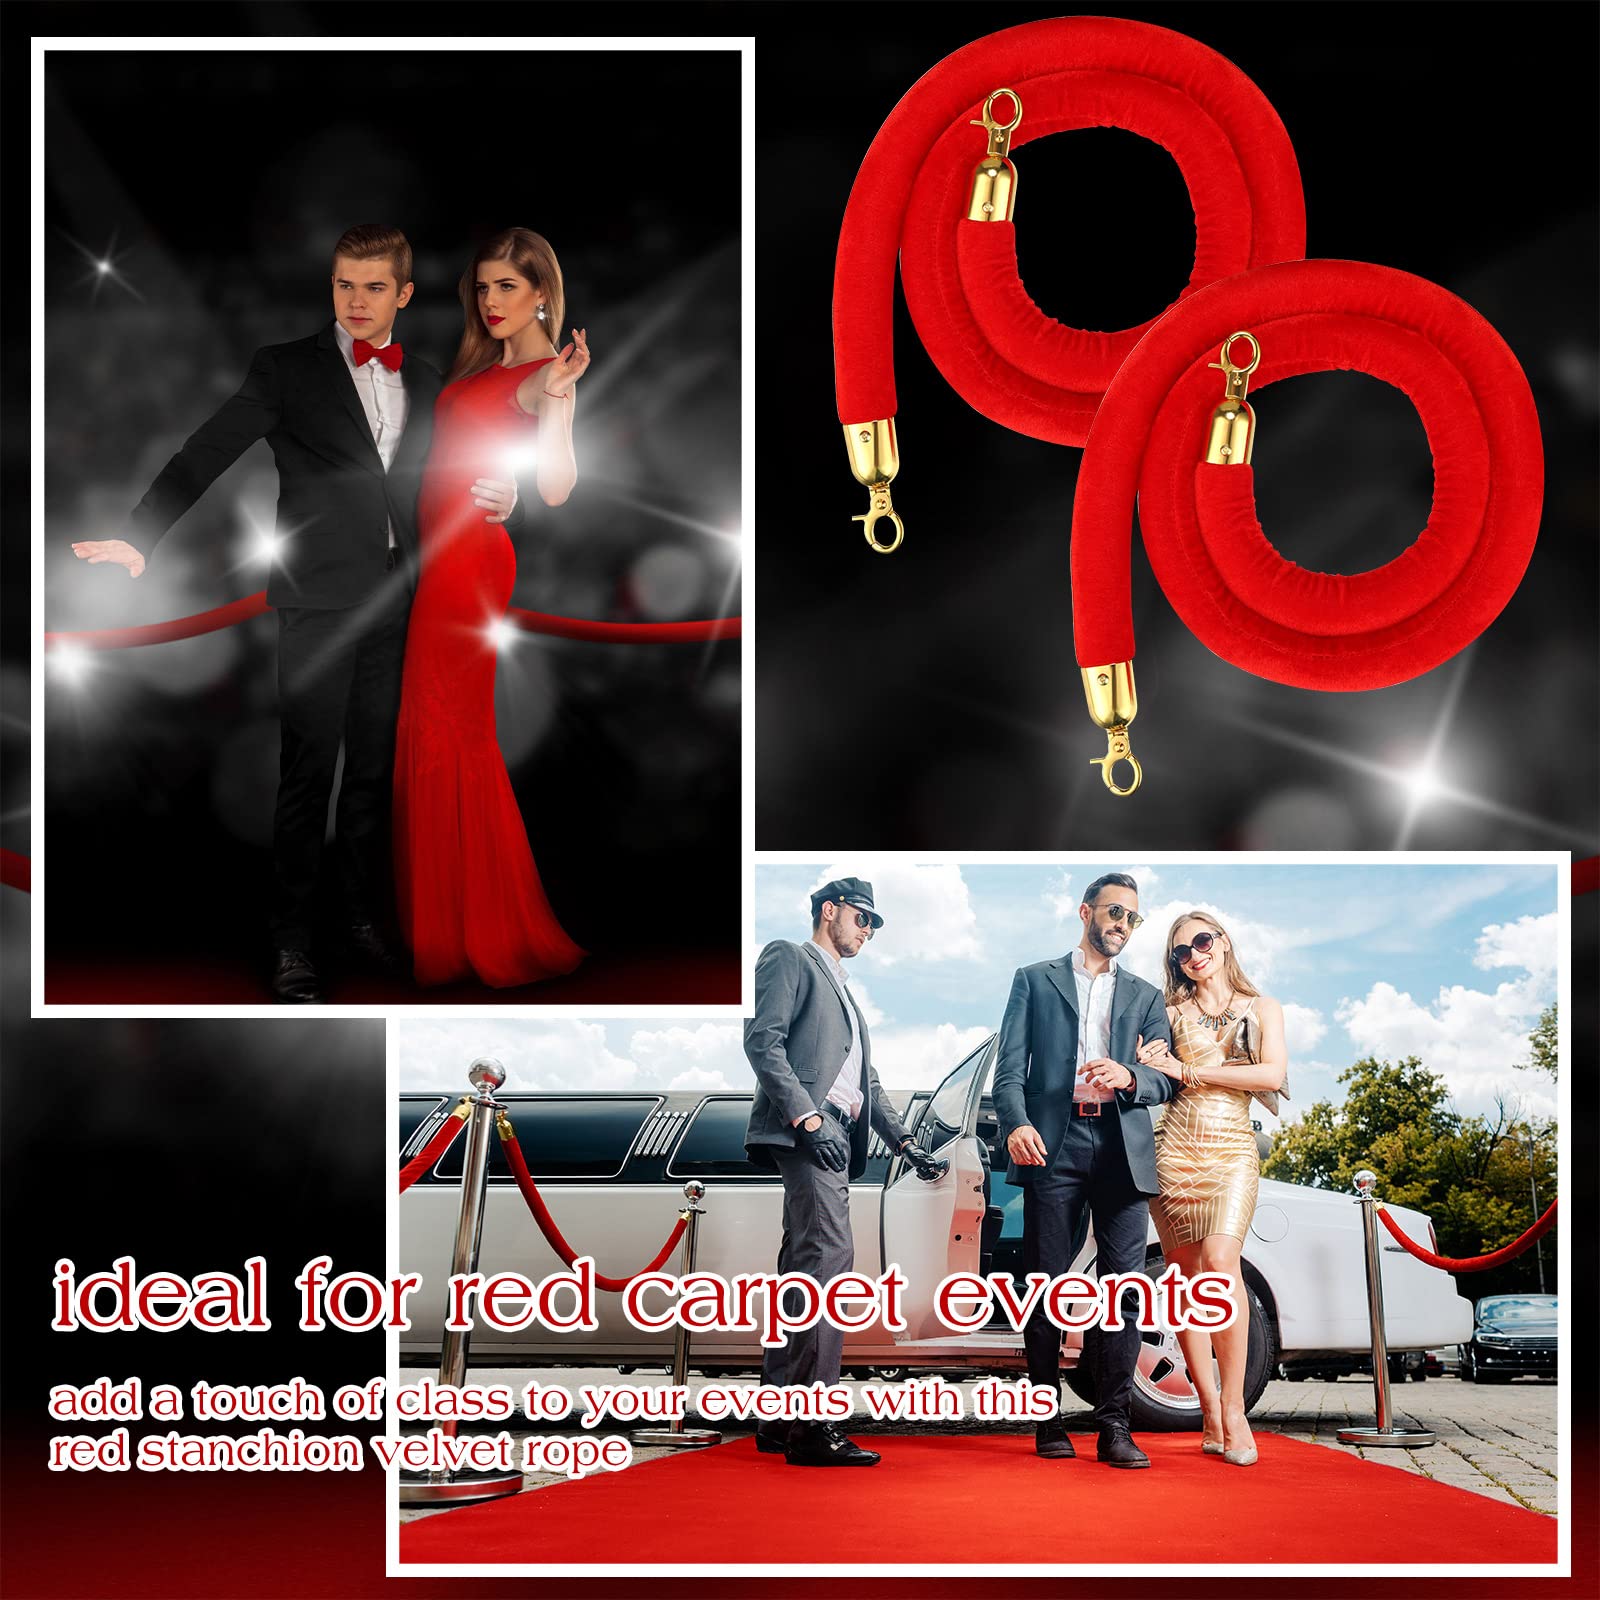 Nuogo 6 Pcs Velvet Stanchion Rope Red Carpet Party Decorations 5ft Crowd Control Velvet Ropes Safety Barrier with Gold Hook for Event Movie Theaters Grand Opening Hotel Christmas Party Supplies